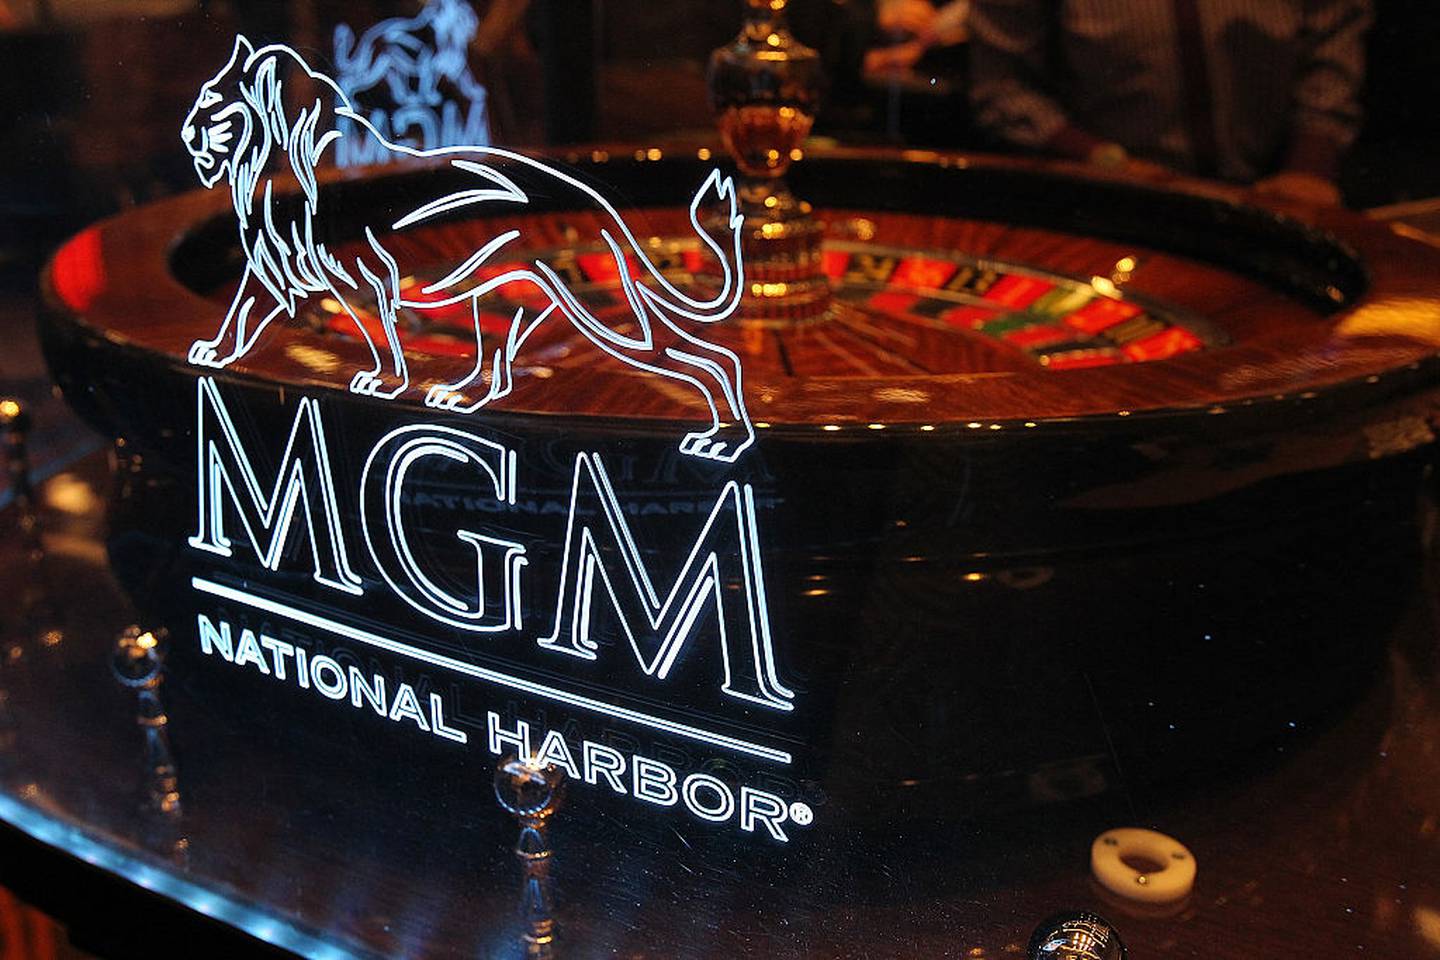 NATIONAL HARBOR, MD - DECEMBER 08:  General view of the atmosphere at the MGM National Harbor Grand Opening Gala on December 8, 2016 in National Harbor, Maryland.